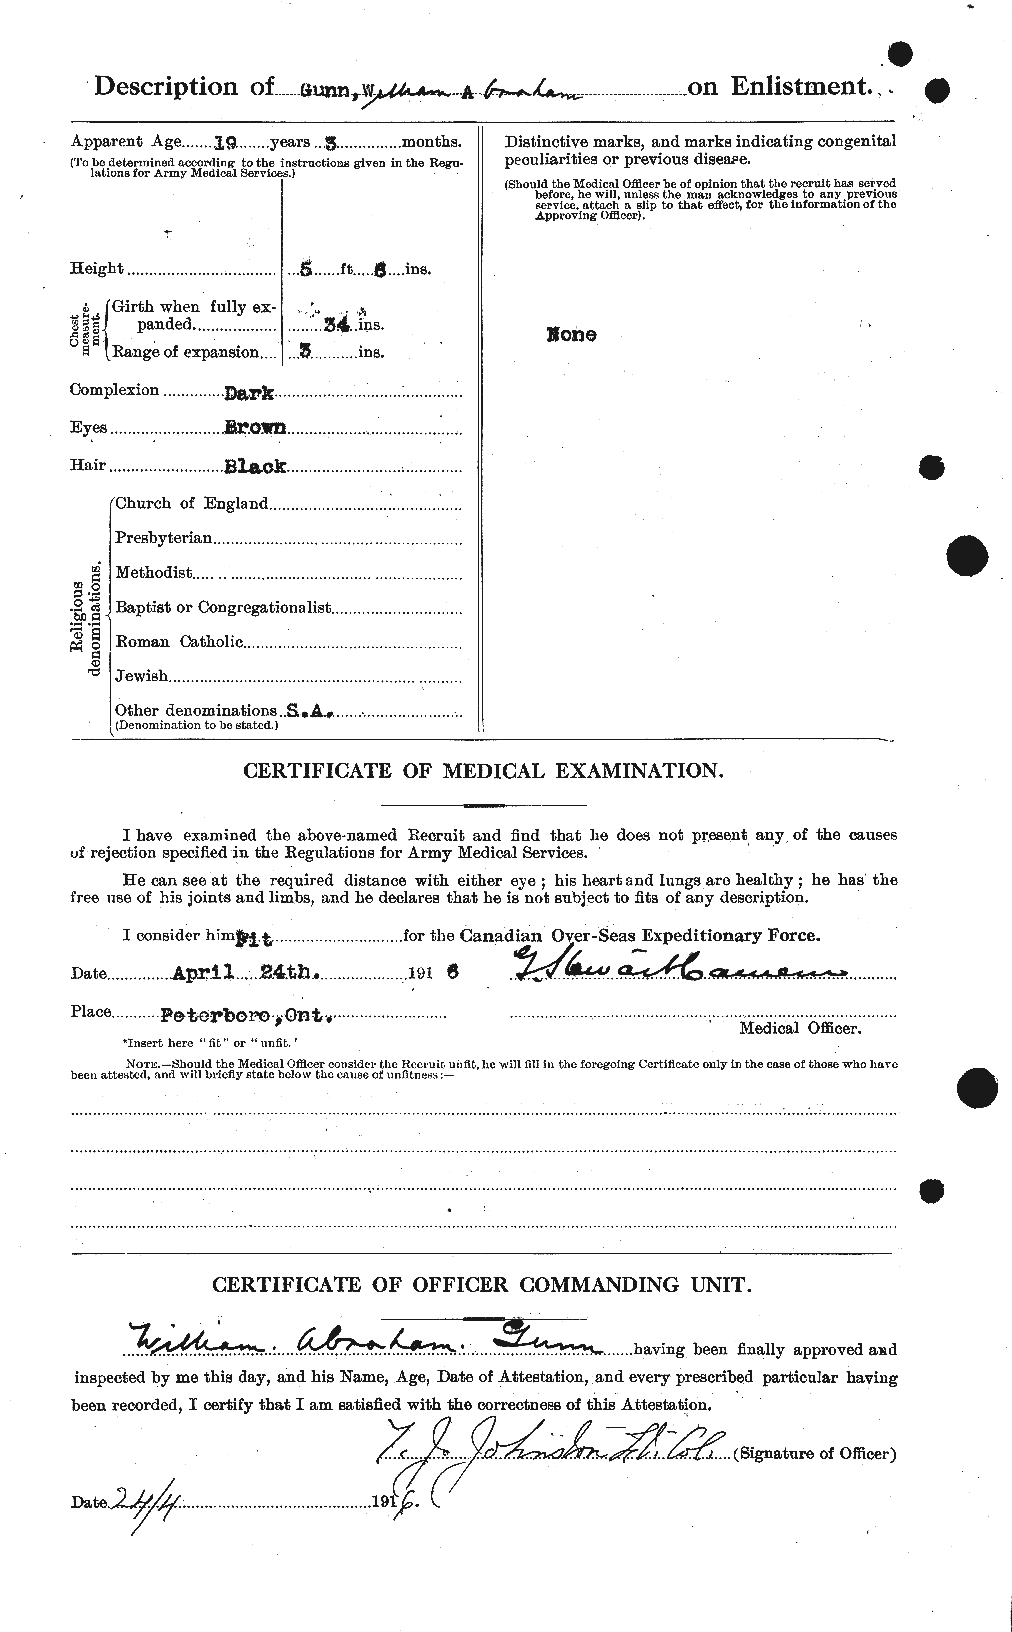 Personnel Records of the First World War - CEF 369359b